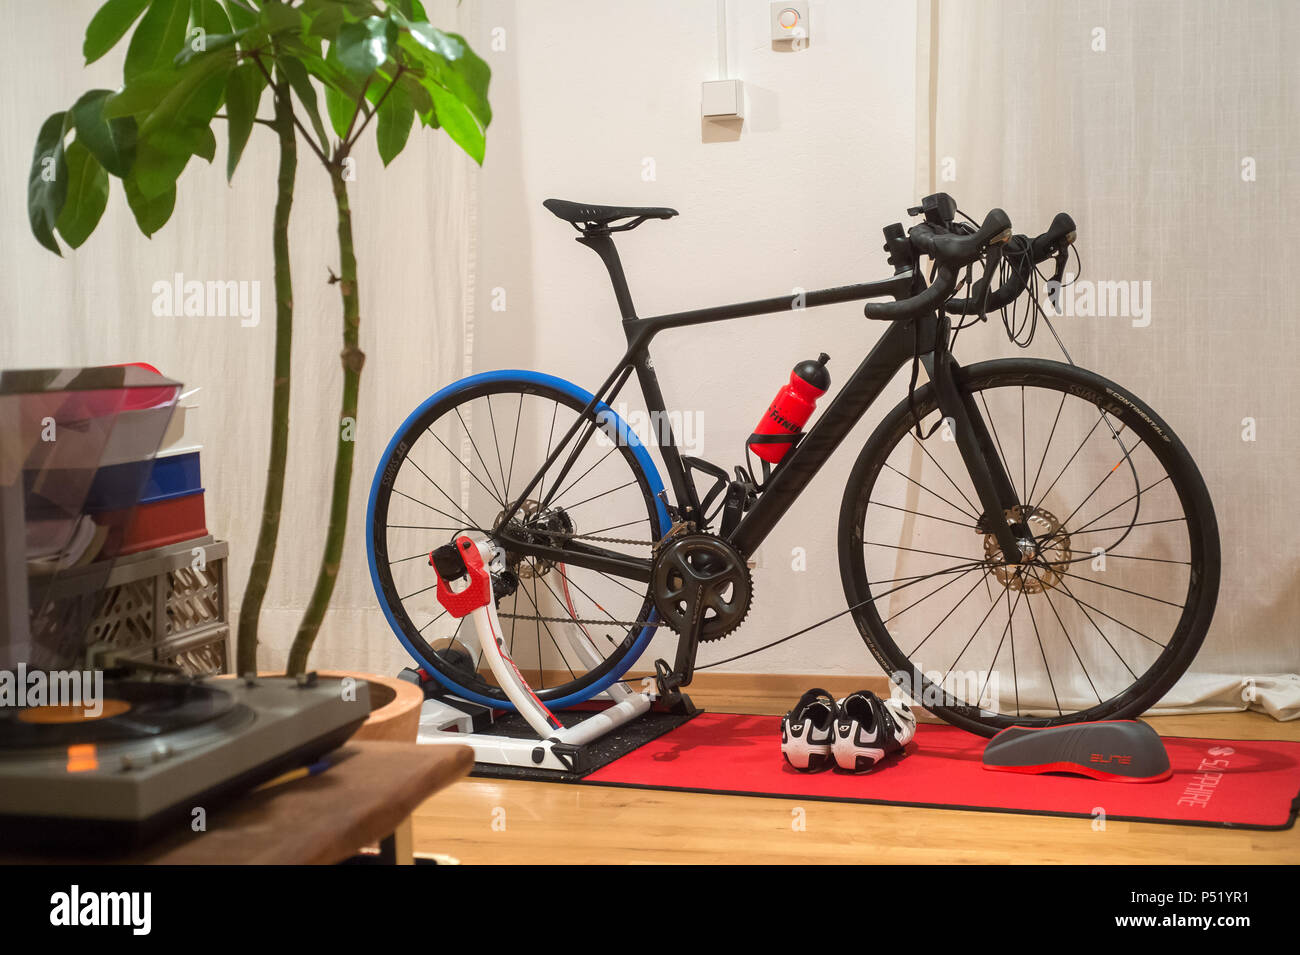 A road bike in a living room on a roll Stock Photo